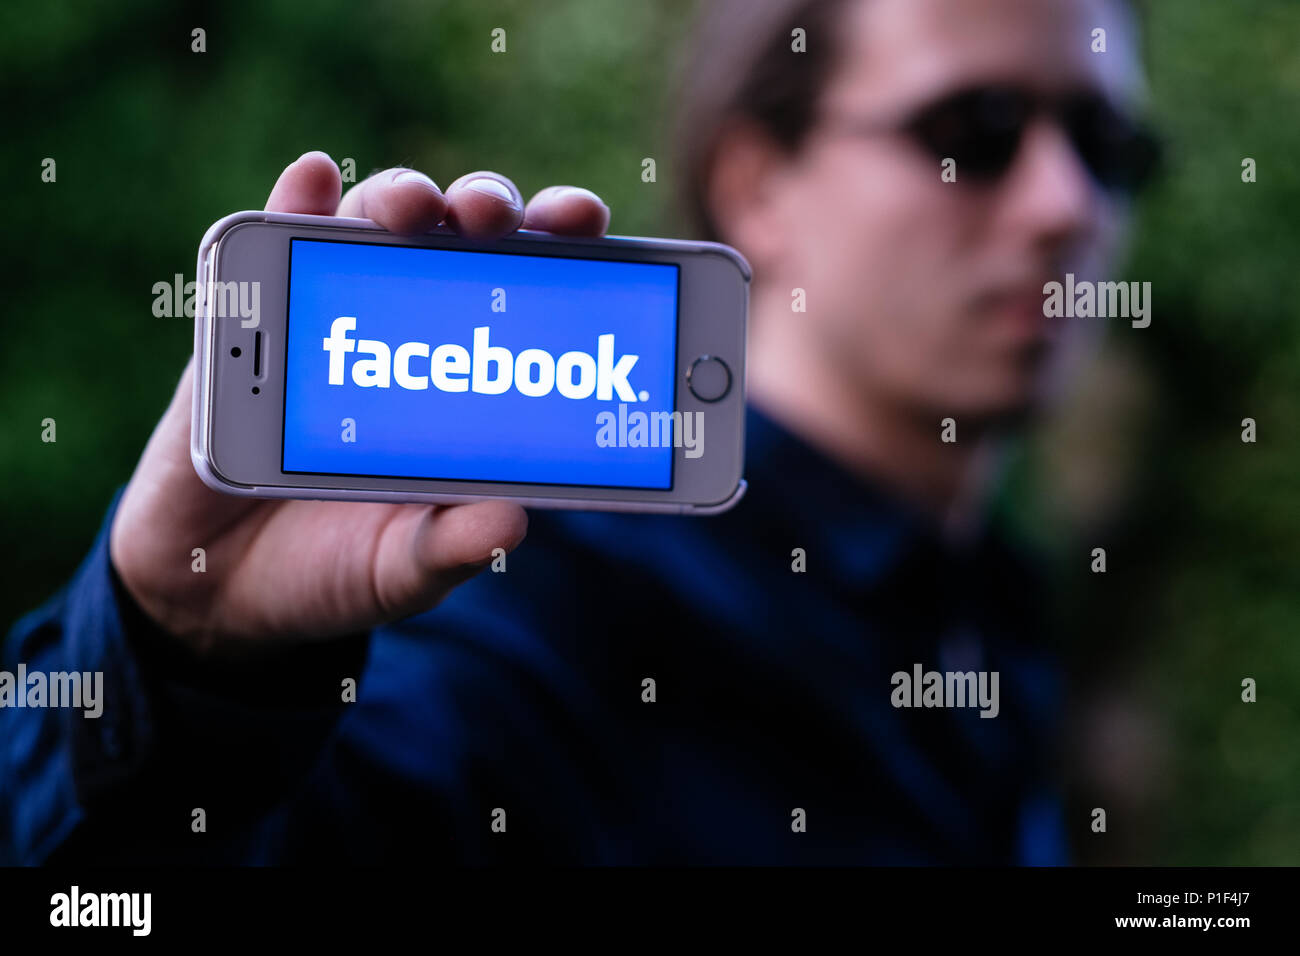 Closeup of serious young man with sunglasses holding white iPhone with FACEBOOK LOGO on screen Stock Photo